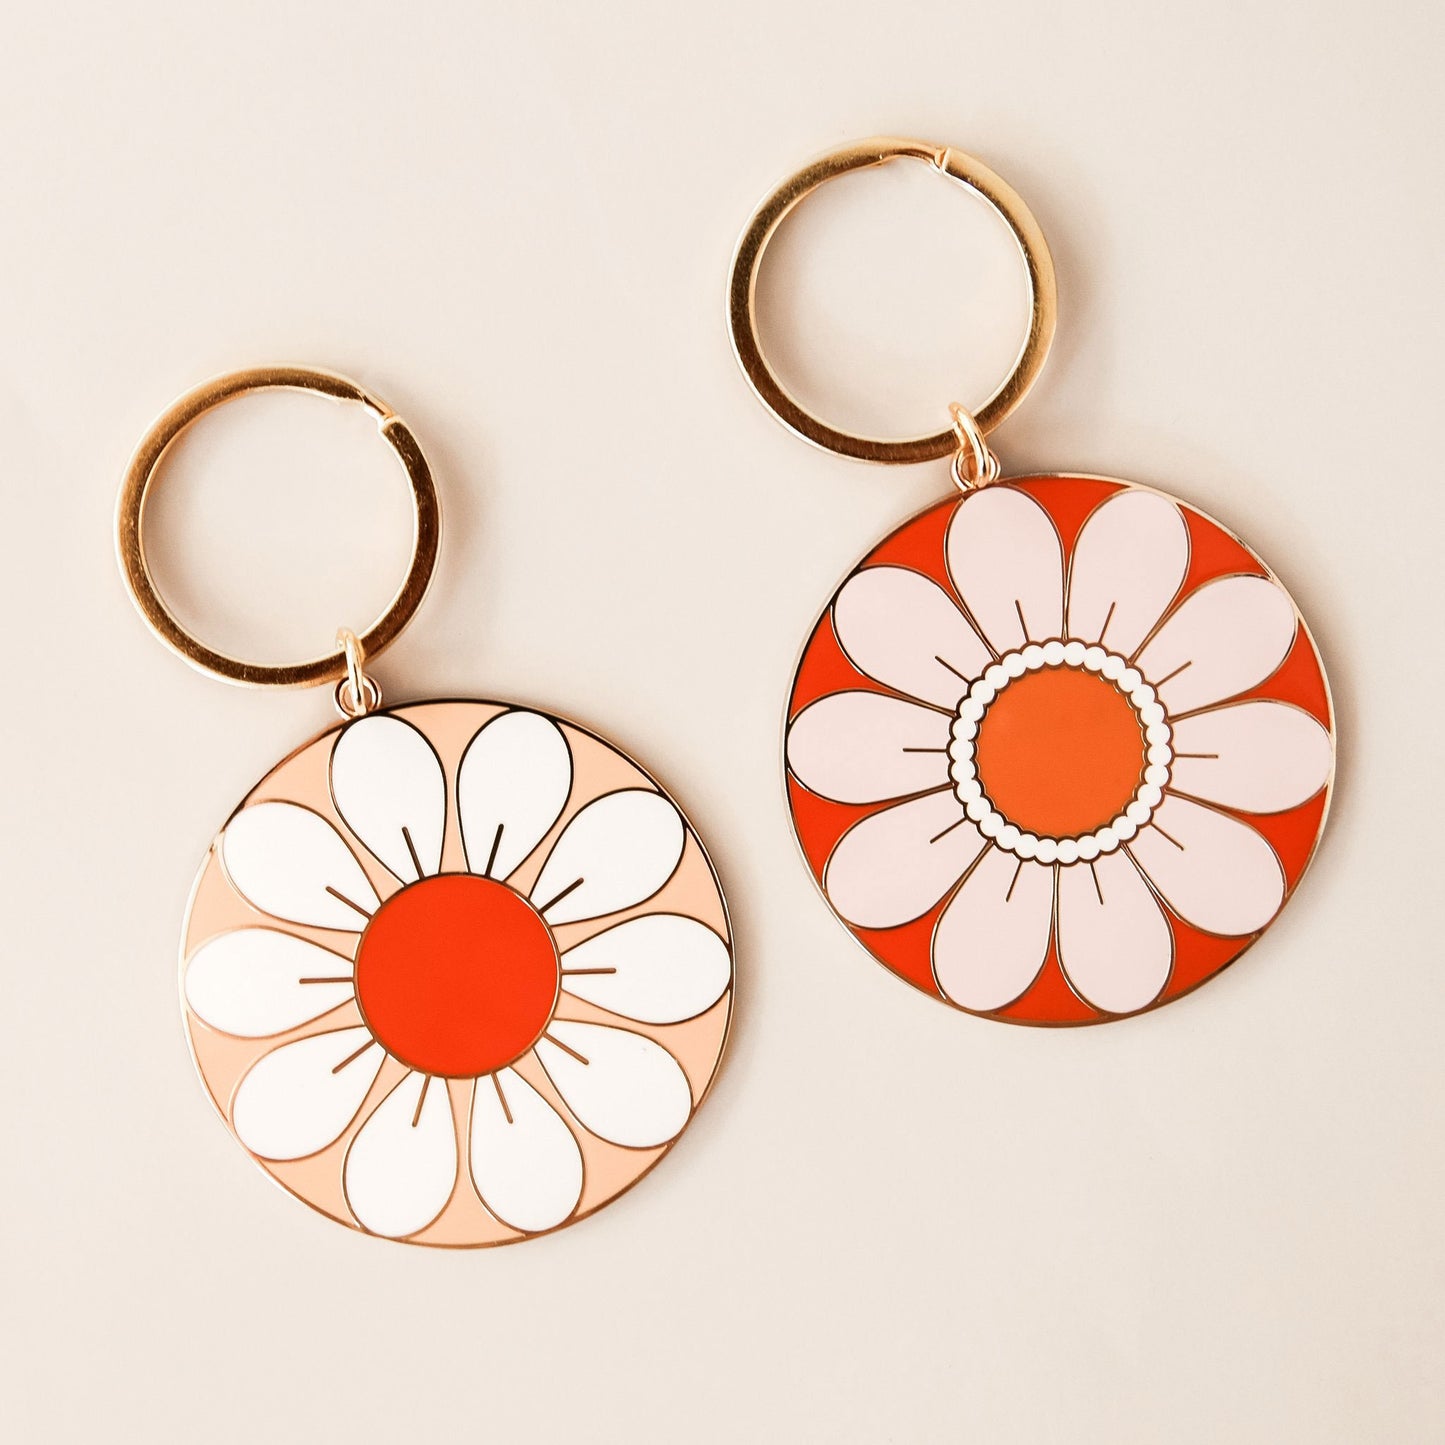 Two circular flower key chains both complete with golden key chain hoops. To the left is a flower with white petals and red center and to the right is a flower with light beige petals and orange center.